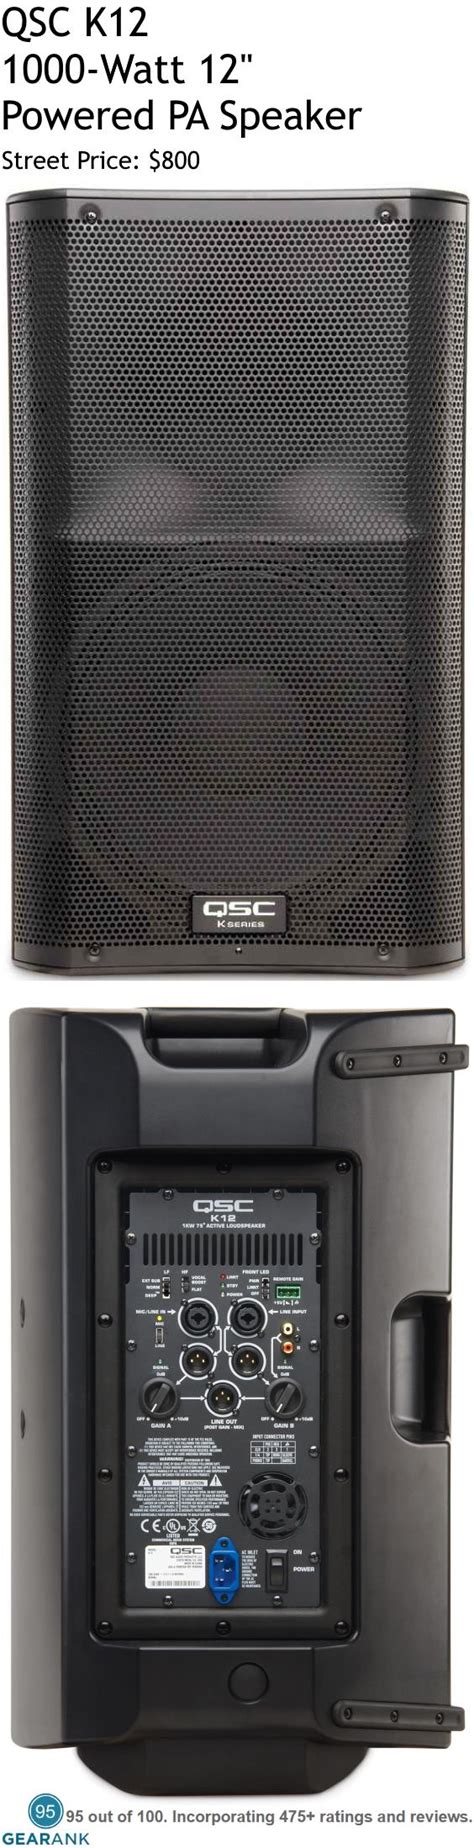 Qsc K12 1000w 12 Powered Pa Speaker The Qsc K12 Gets Positive Reviews